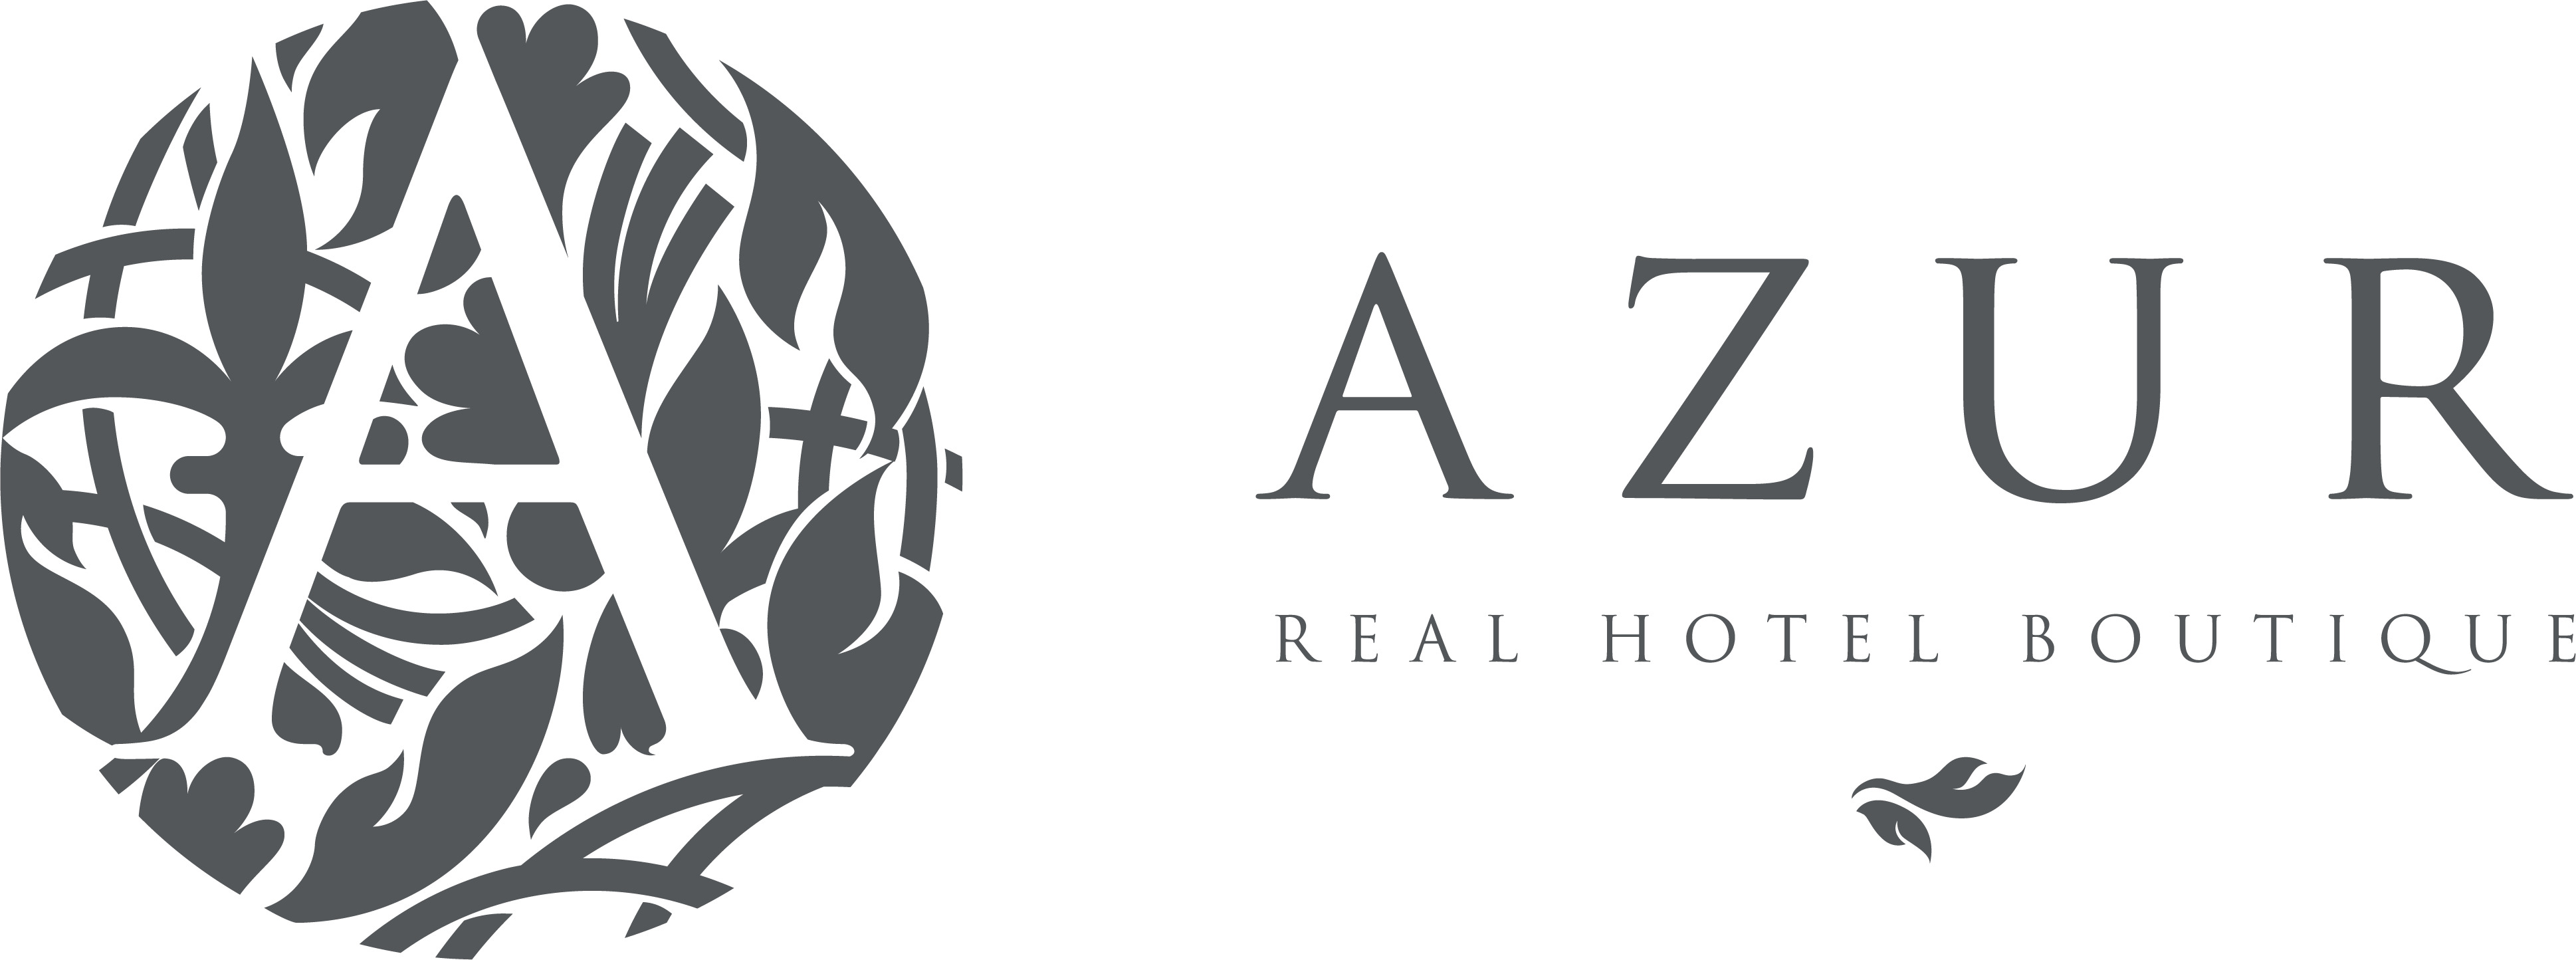 AZUR REAL HOTEL BOUTIQUE